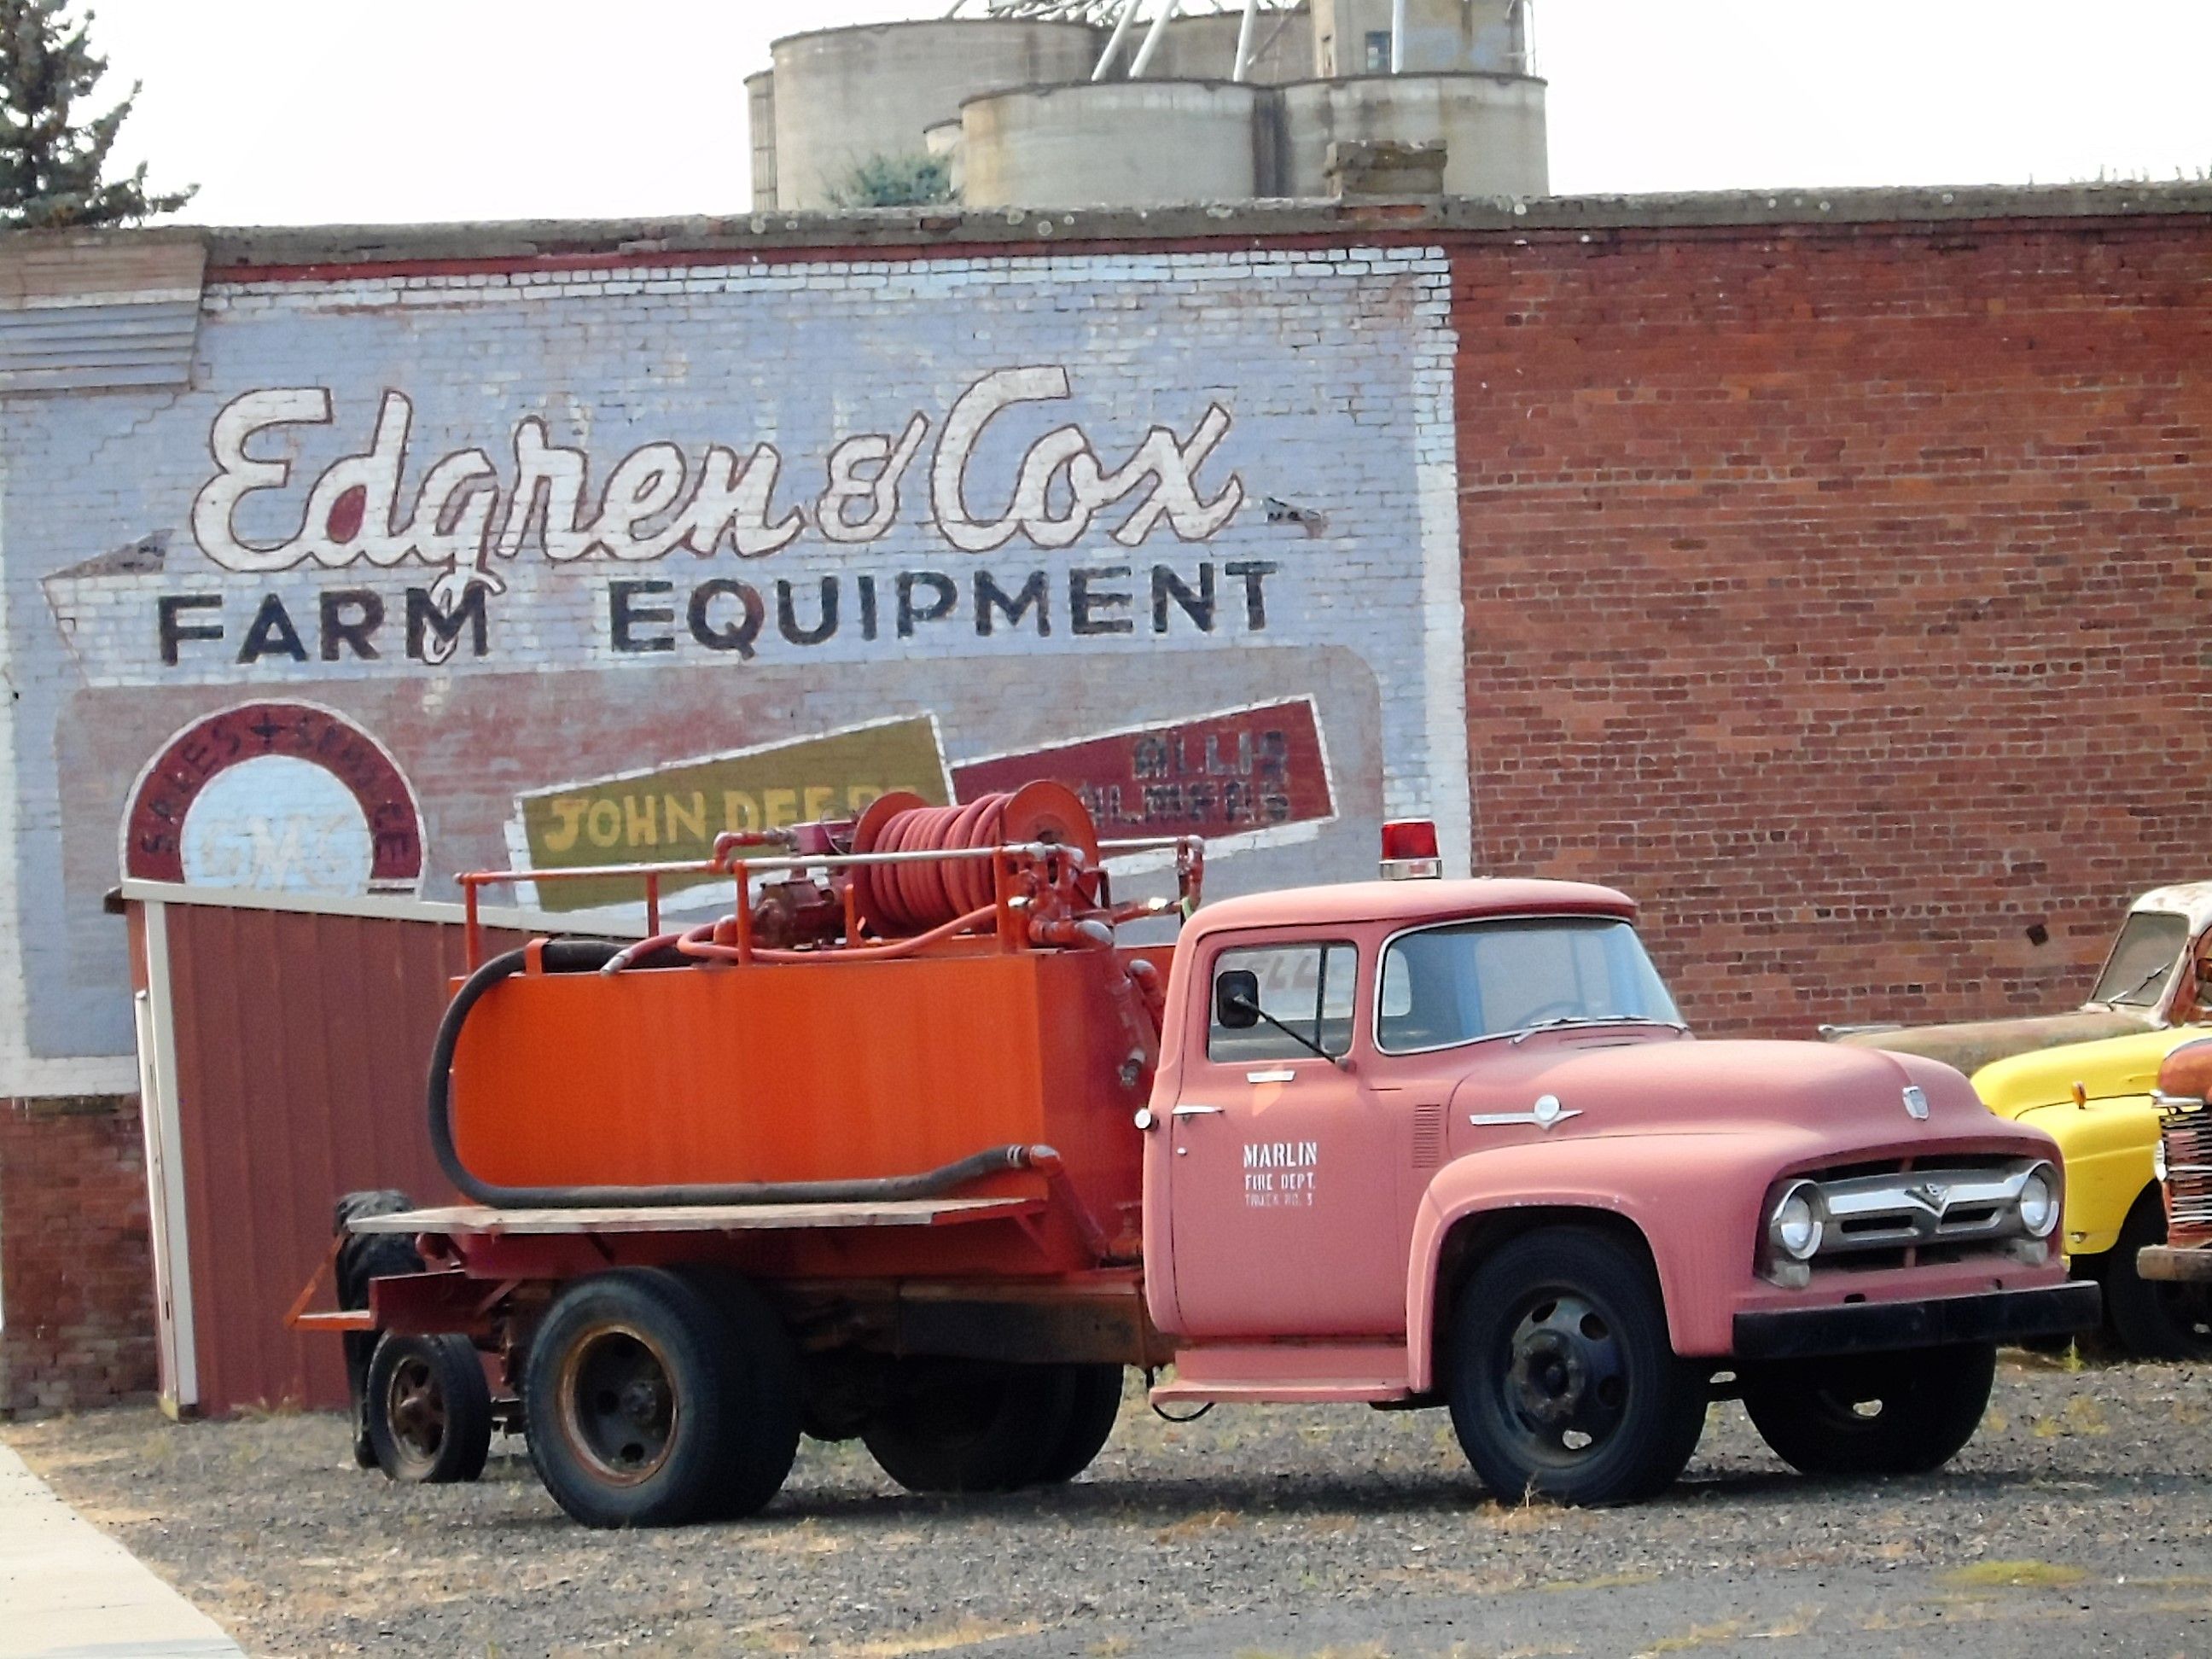 Dave's Old Truck Rescue with Building advertisement in background.jpg